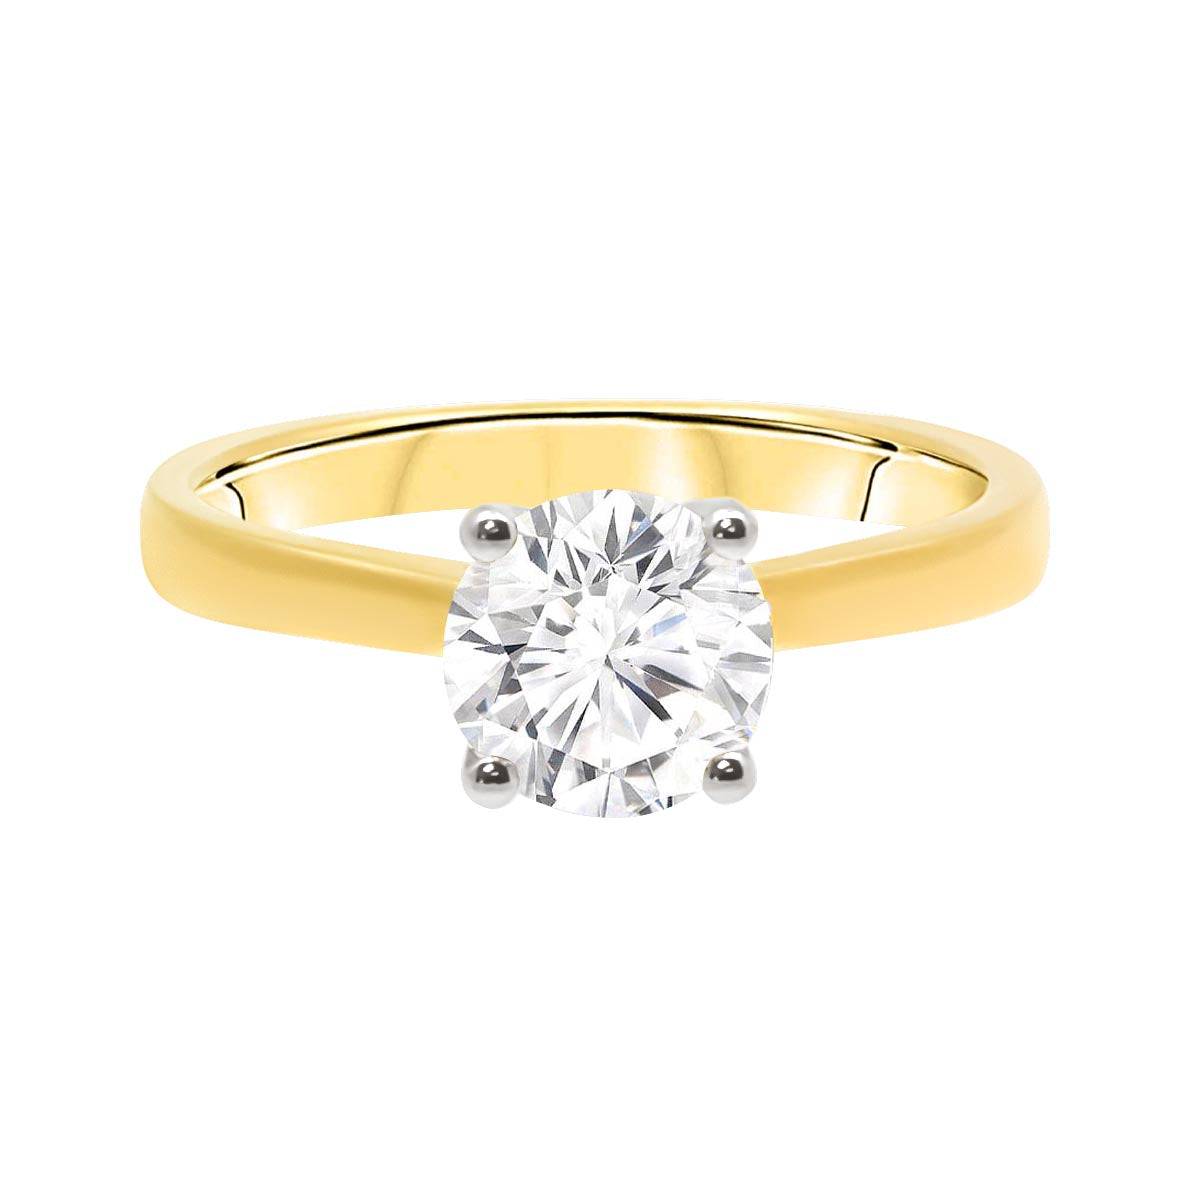 Tulip Setting Solitaire Engagement Ring In Yellow  Gold Lying Flat